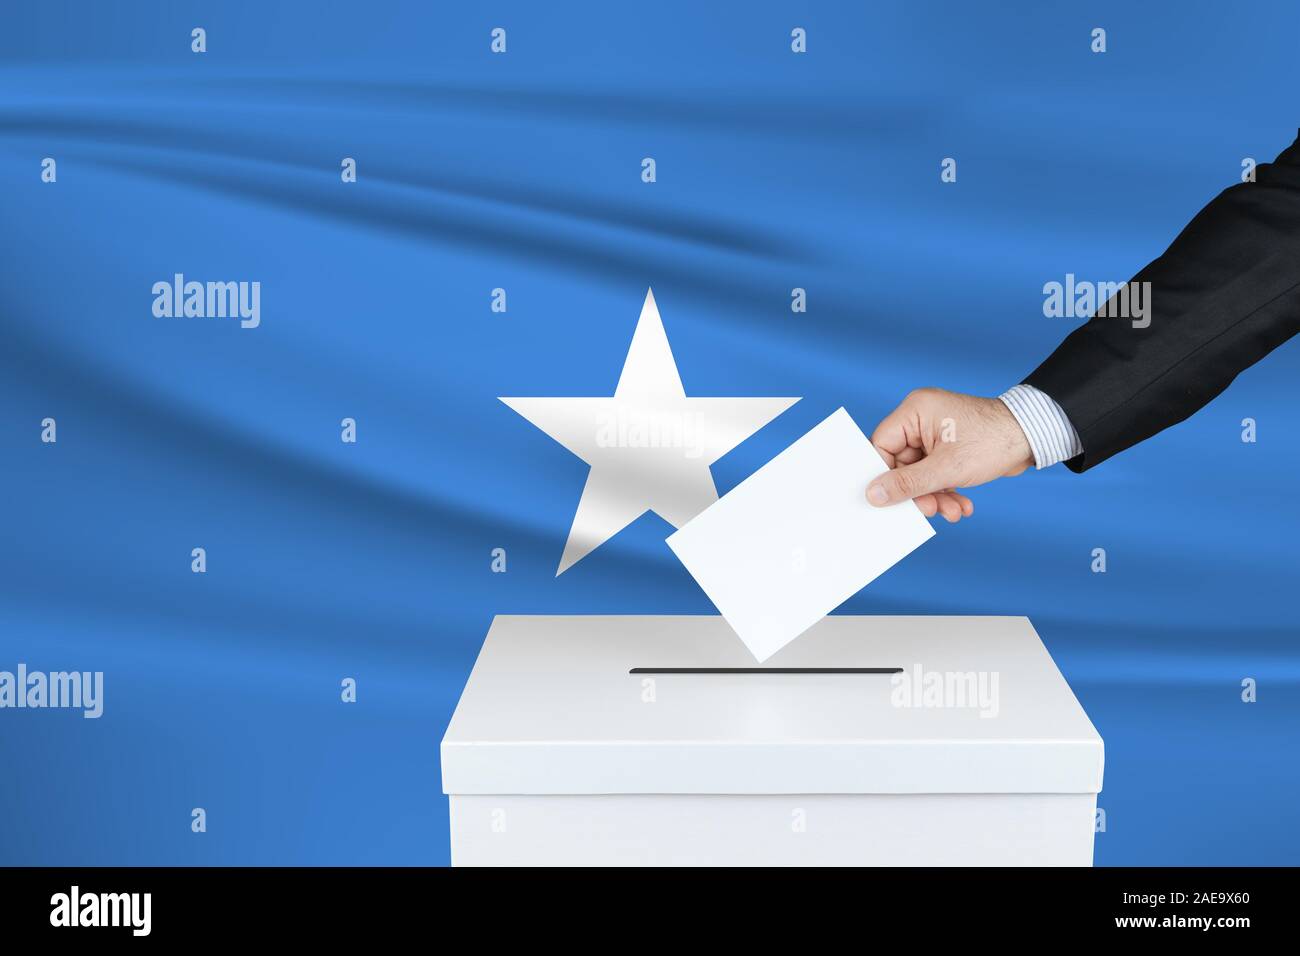 Election in Somalia. The hand of man putting his vote in the ballot box. Waved Somalia flag on background. Stock Photo